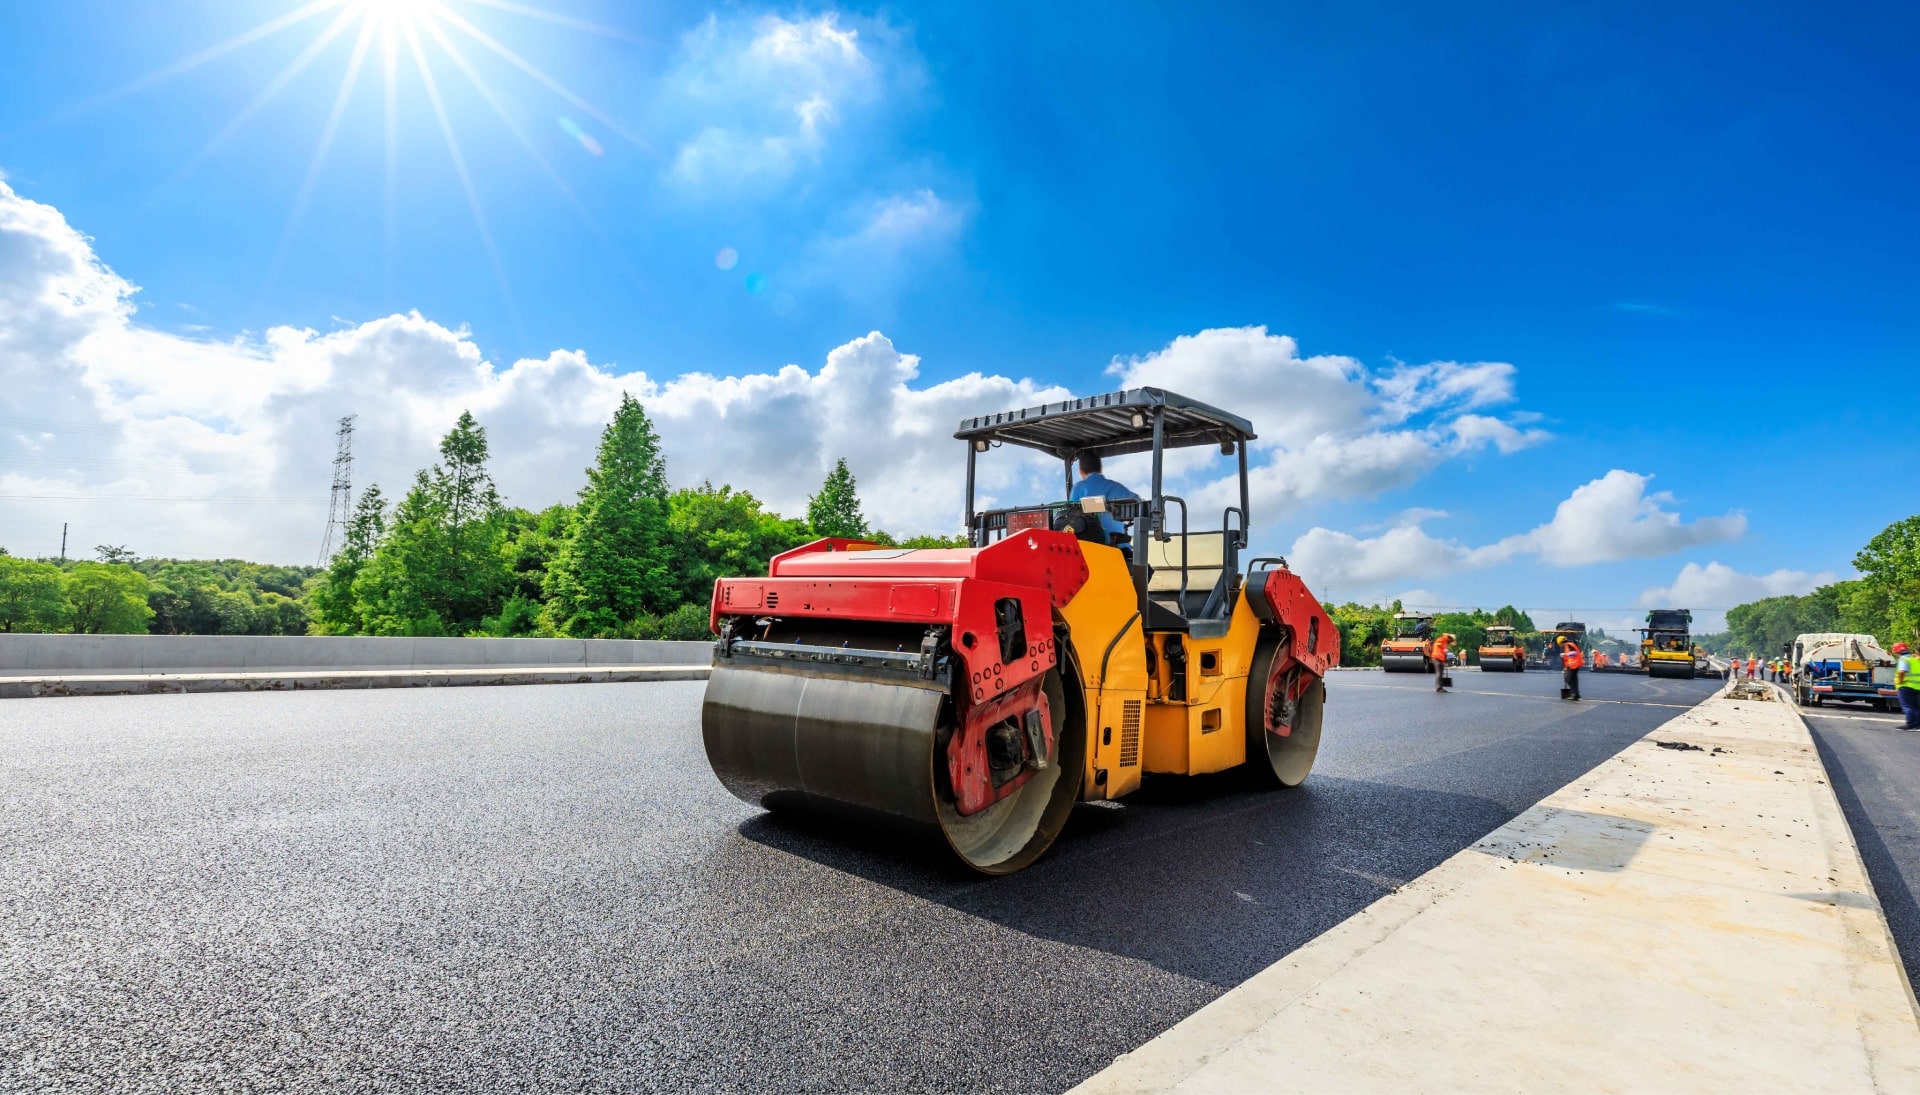 A team of construction workers operating heavy machinery, meticulously laying down fresh, smooth asphalt on a newly constructed road in San Antonio, with steam rising from the hot surface.